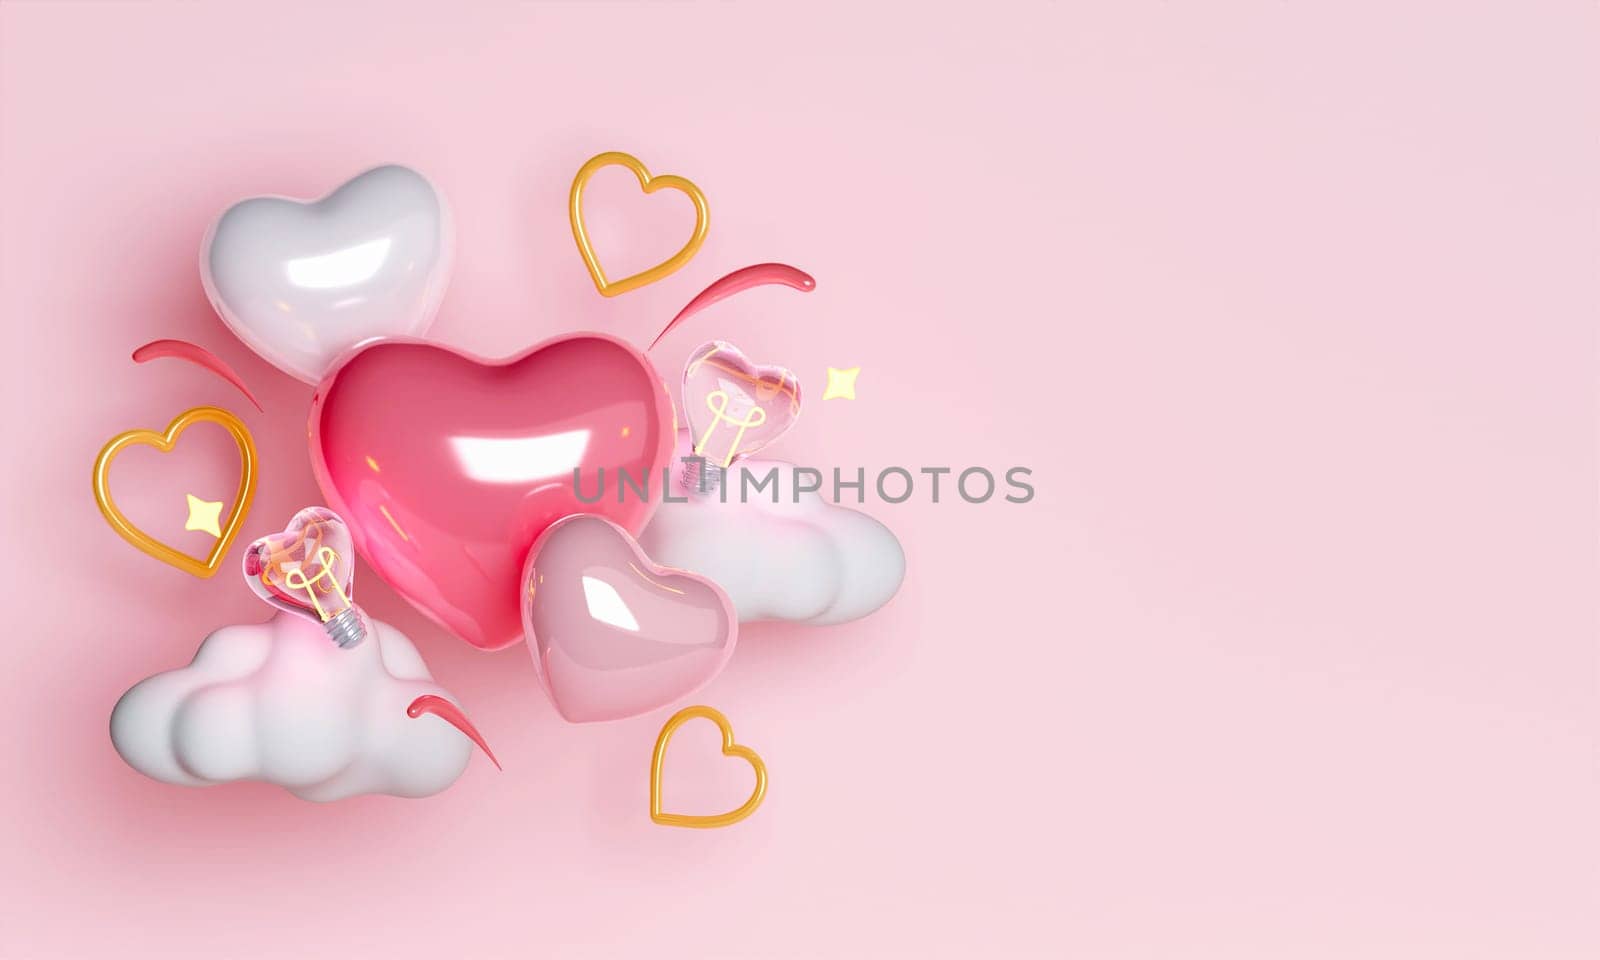 Valentine's day abstract background with 3d heart shape balloons and confetti with copy space. February 14, love. Romantic wedding greeting card. Women's, Mother's day. 3D render illustration by meepiangraphic